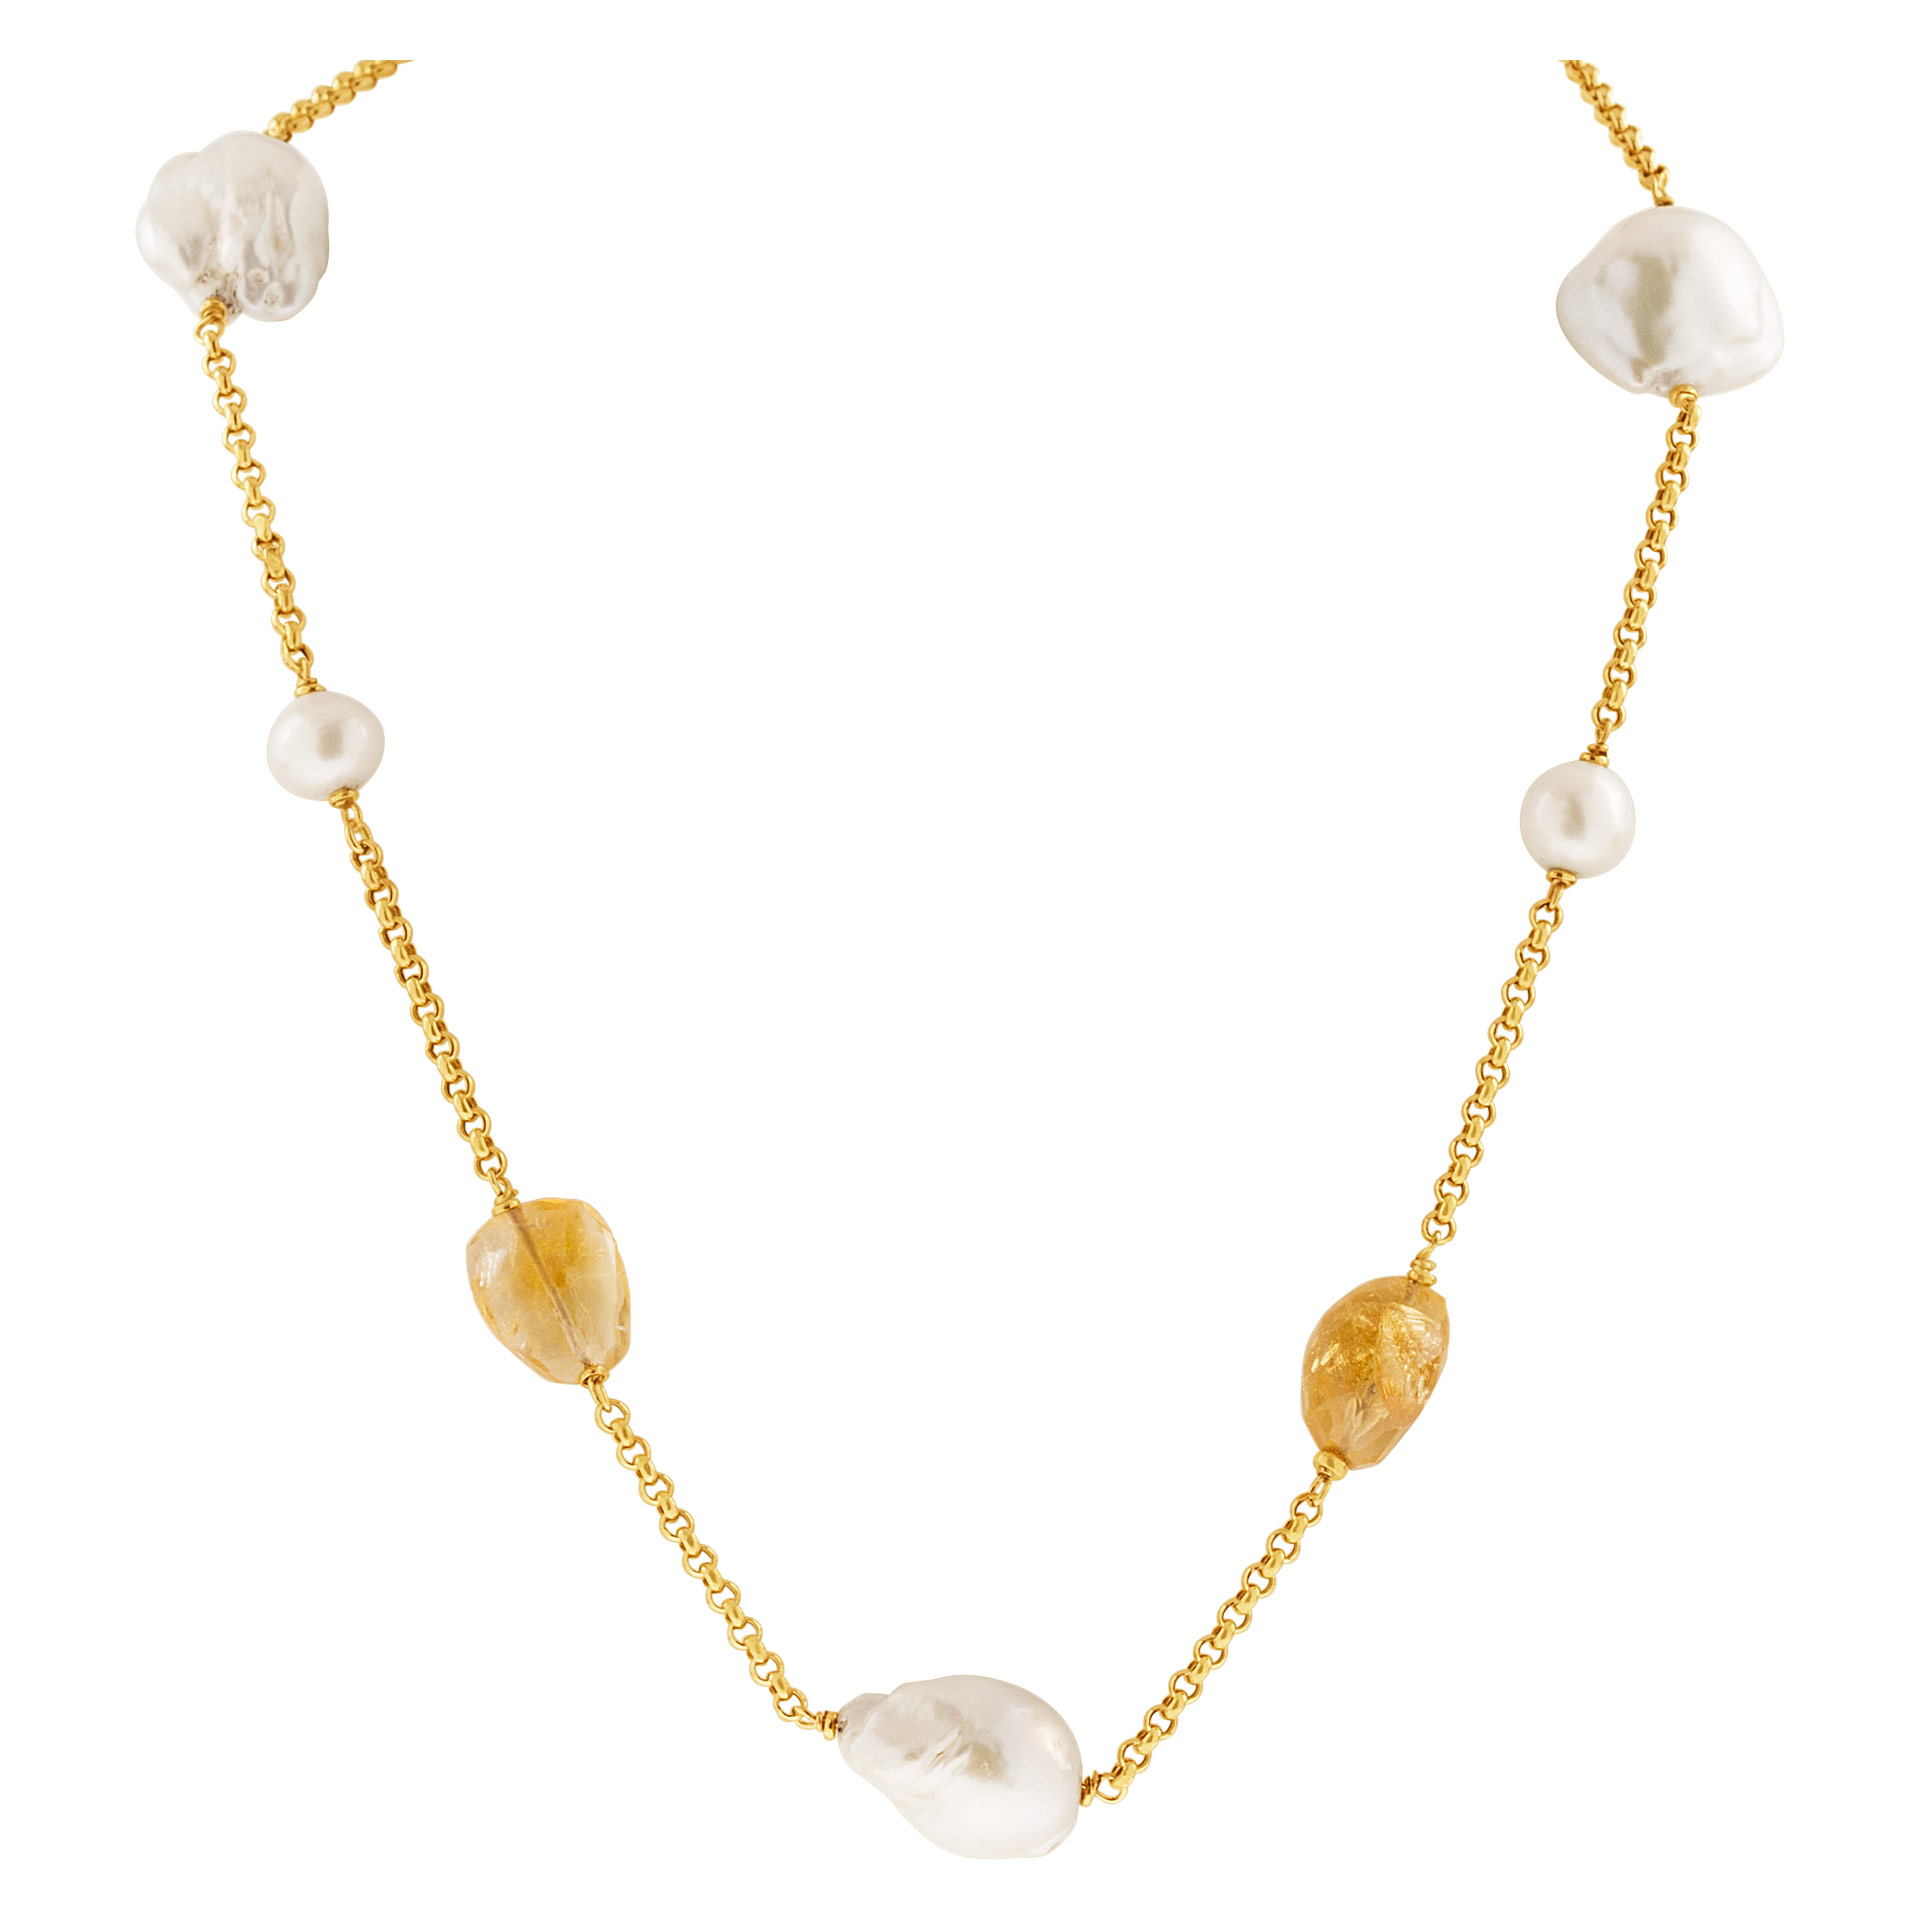 Stylish and funky 14k yellow gold chain with big pearls